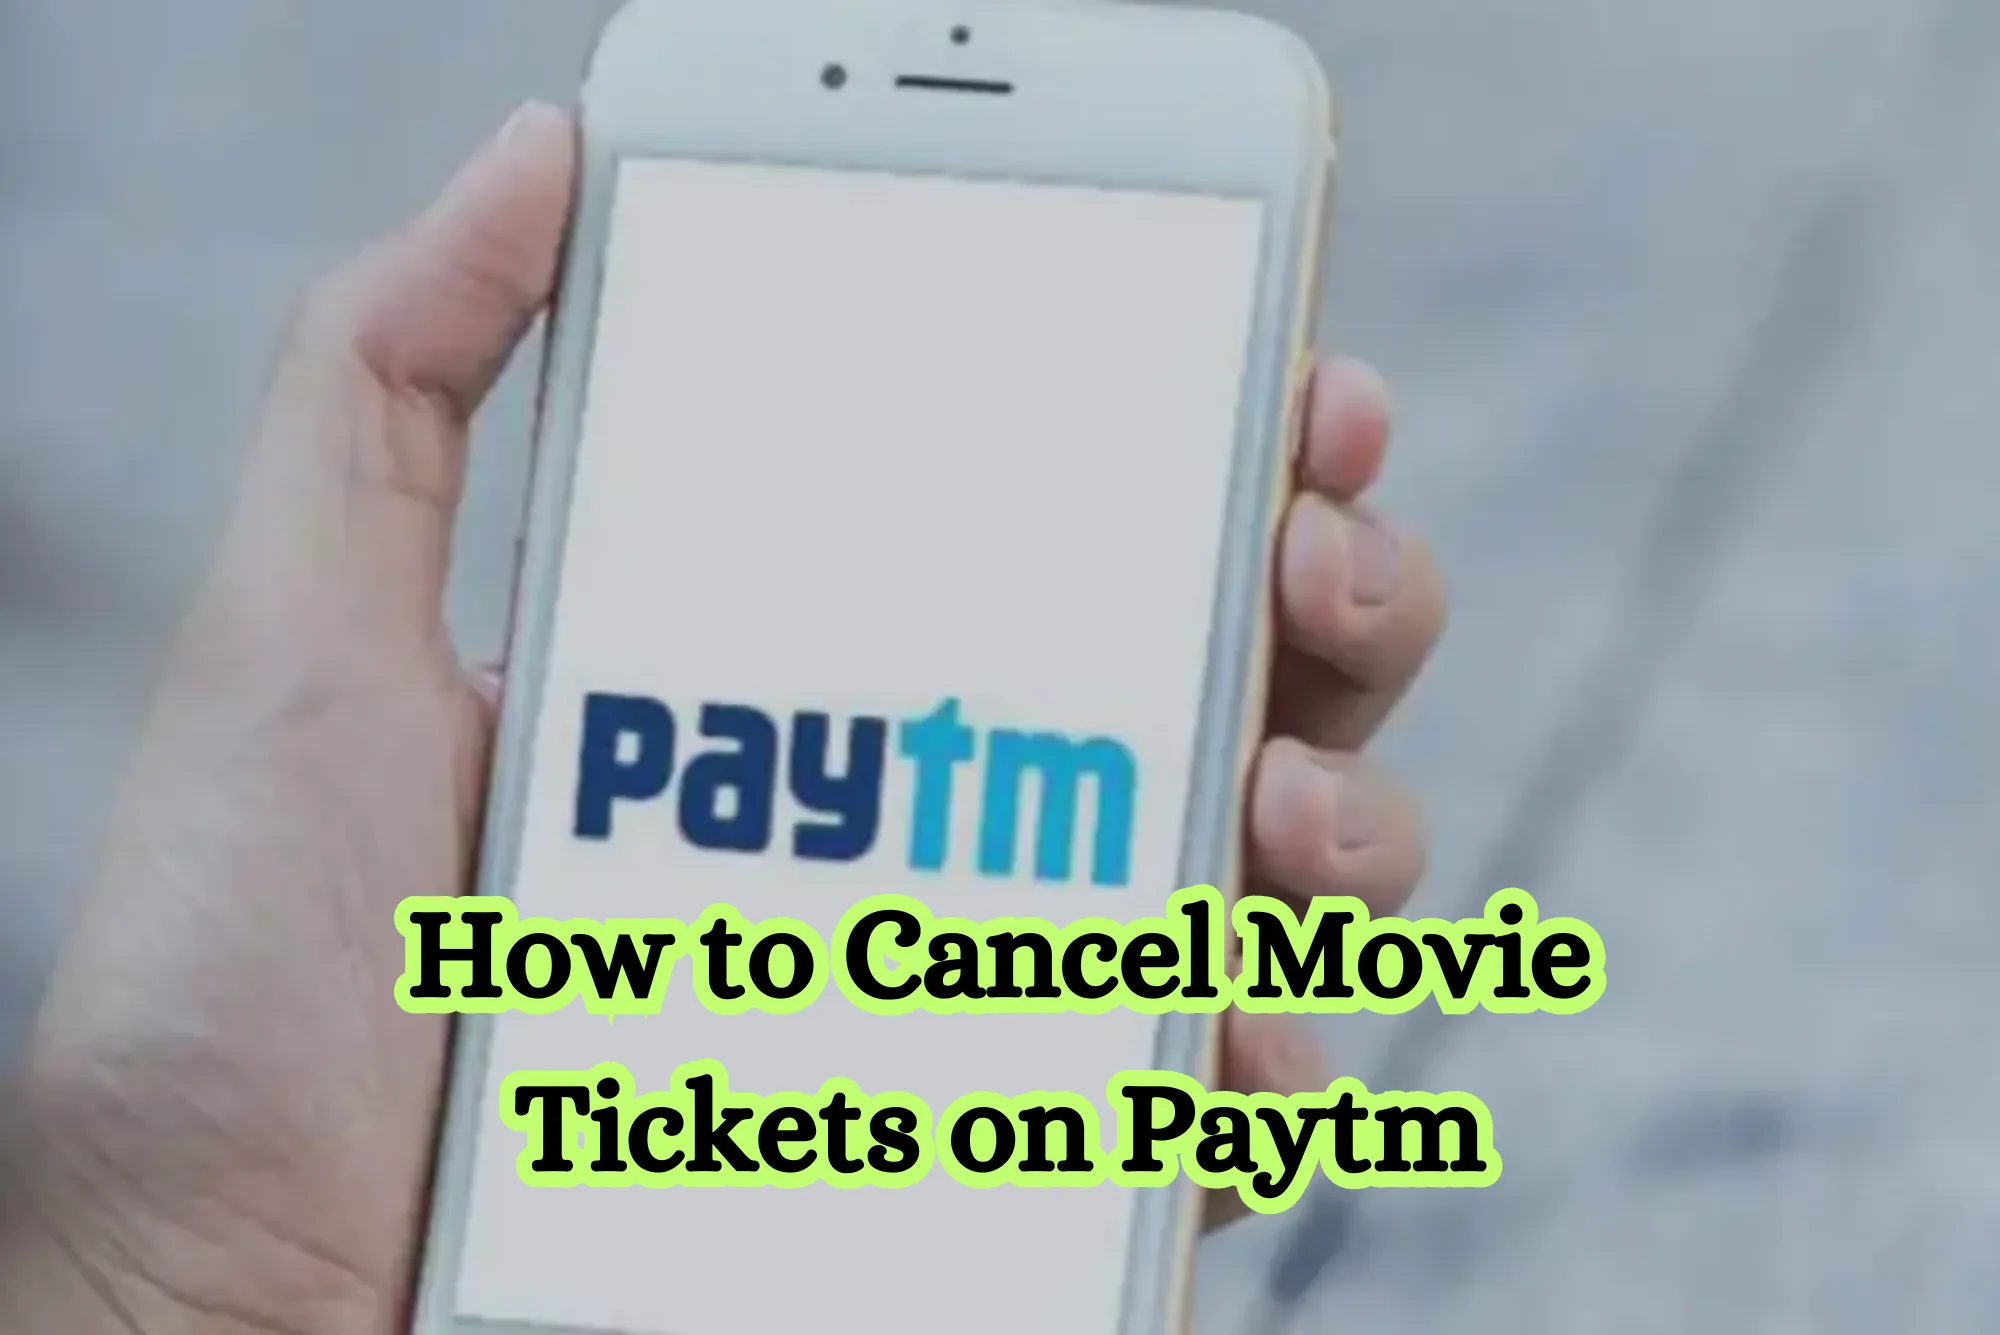 How to Cancel Movie Tickets on Paytm